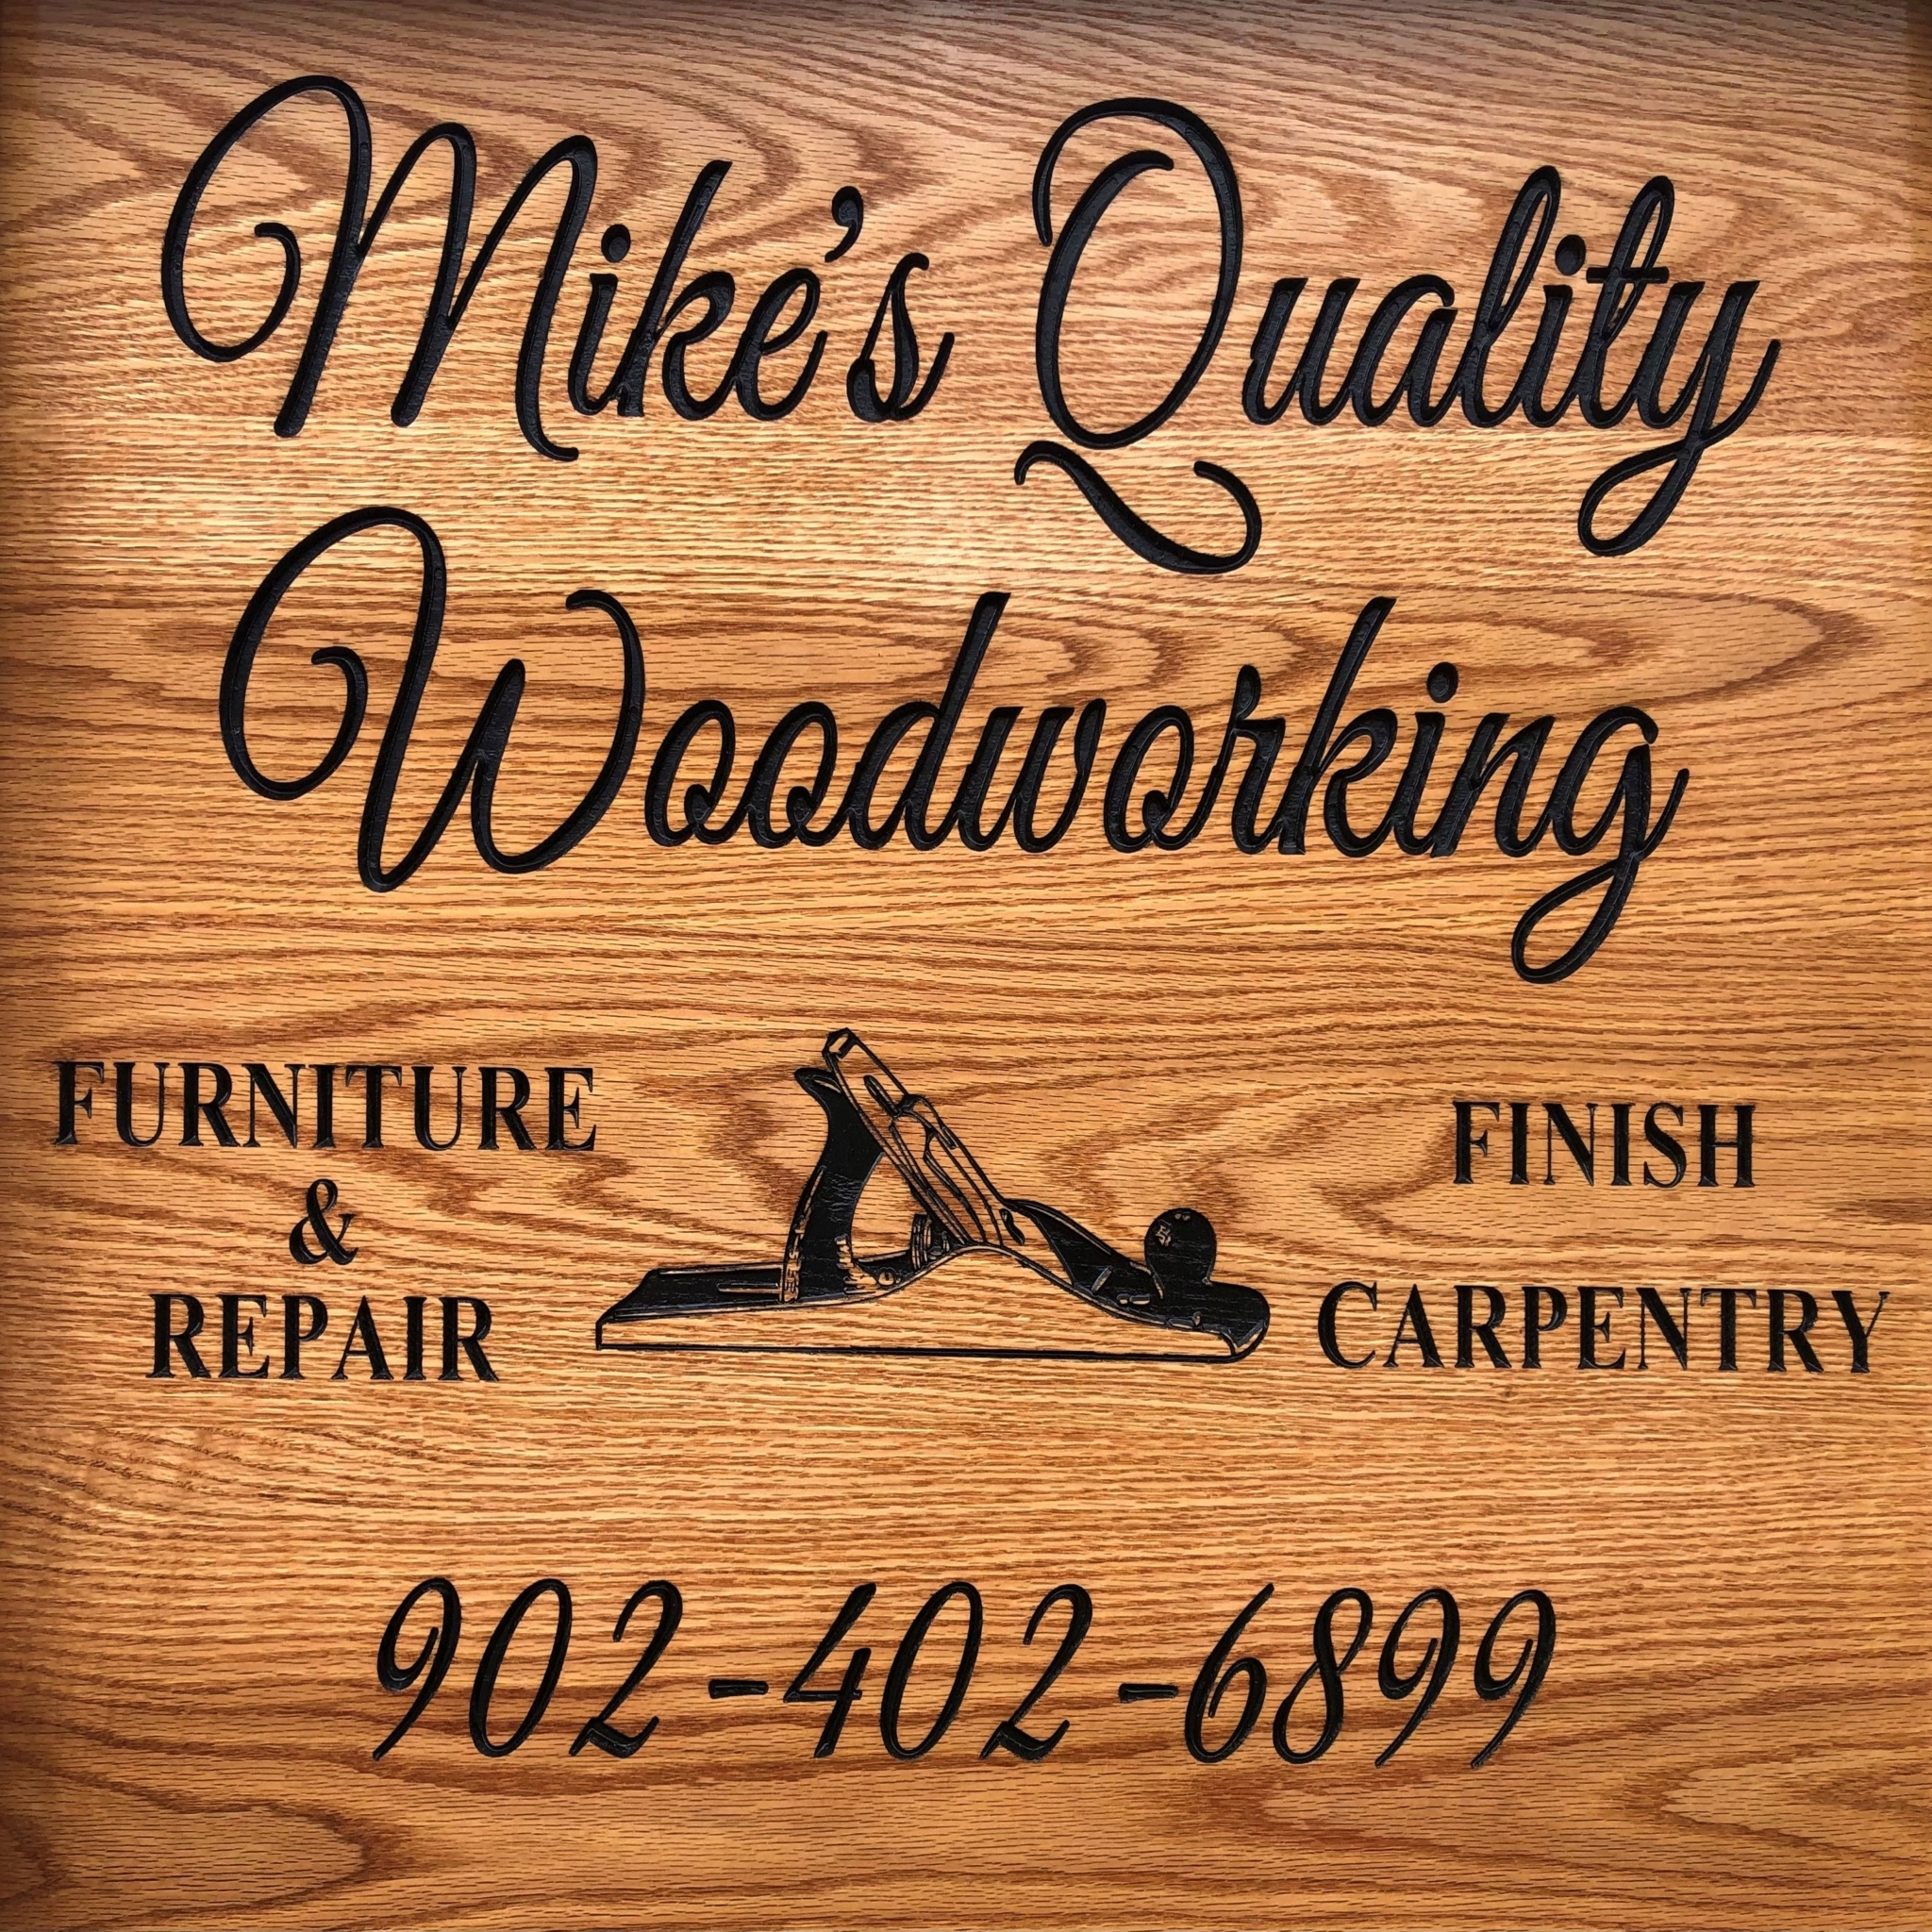 Mike's Quality Woodworking - Woodworkers & Woodworking